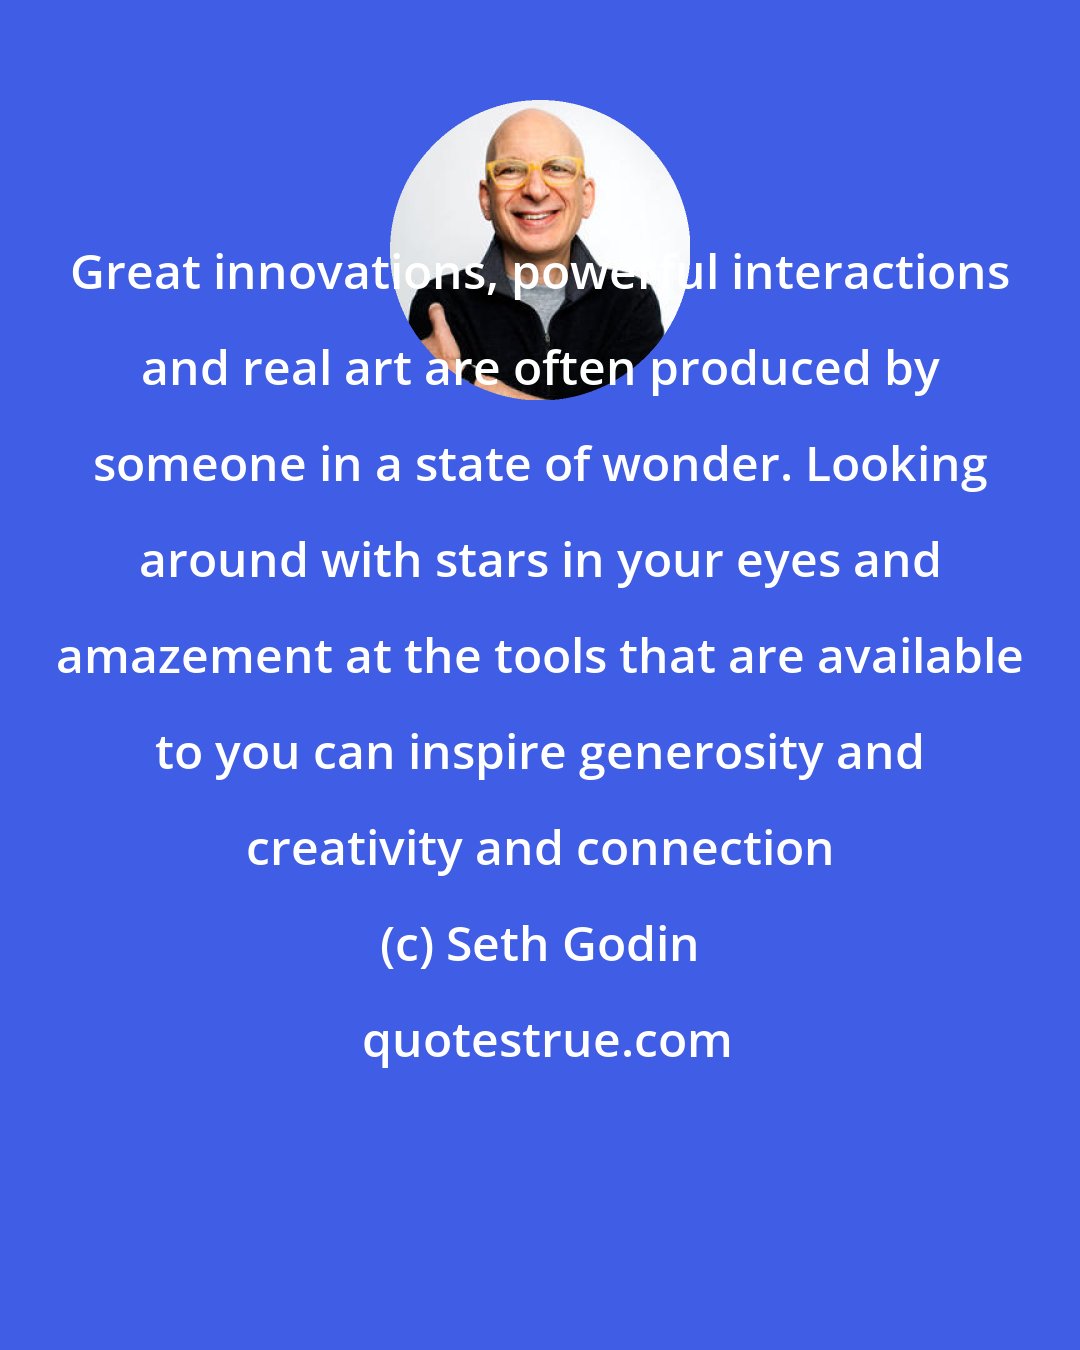 Seth Godin: Great innovations, powerful interactions and real art are often produced by someone in a state of wonder. Looking around with stars in your eyes and amazement at the tools that are available to you can inspire generosity and creativity and connection